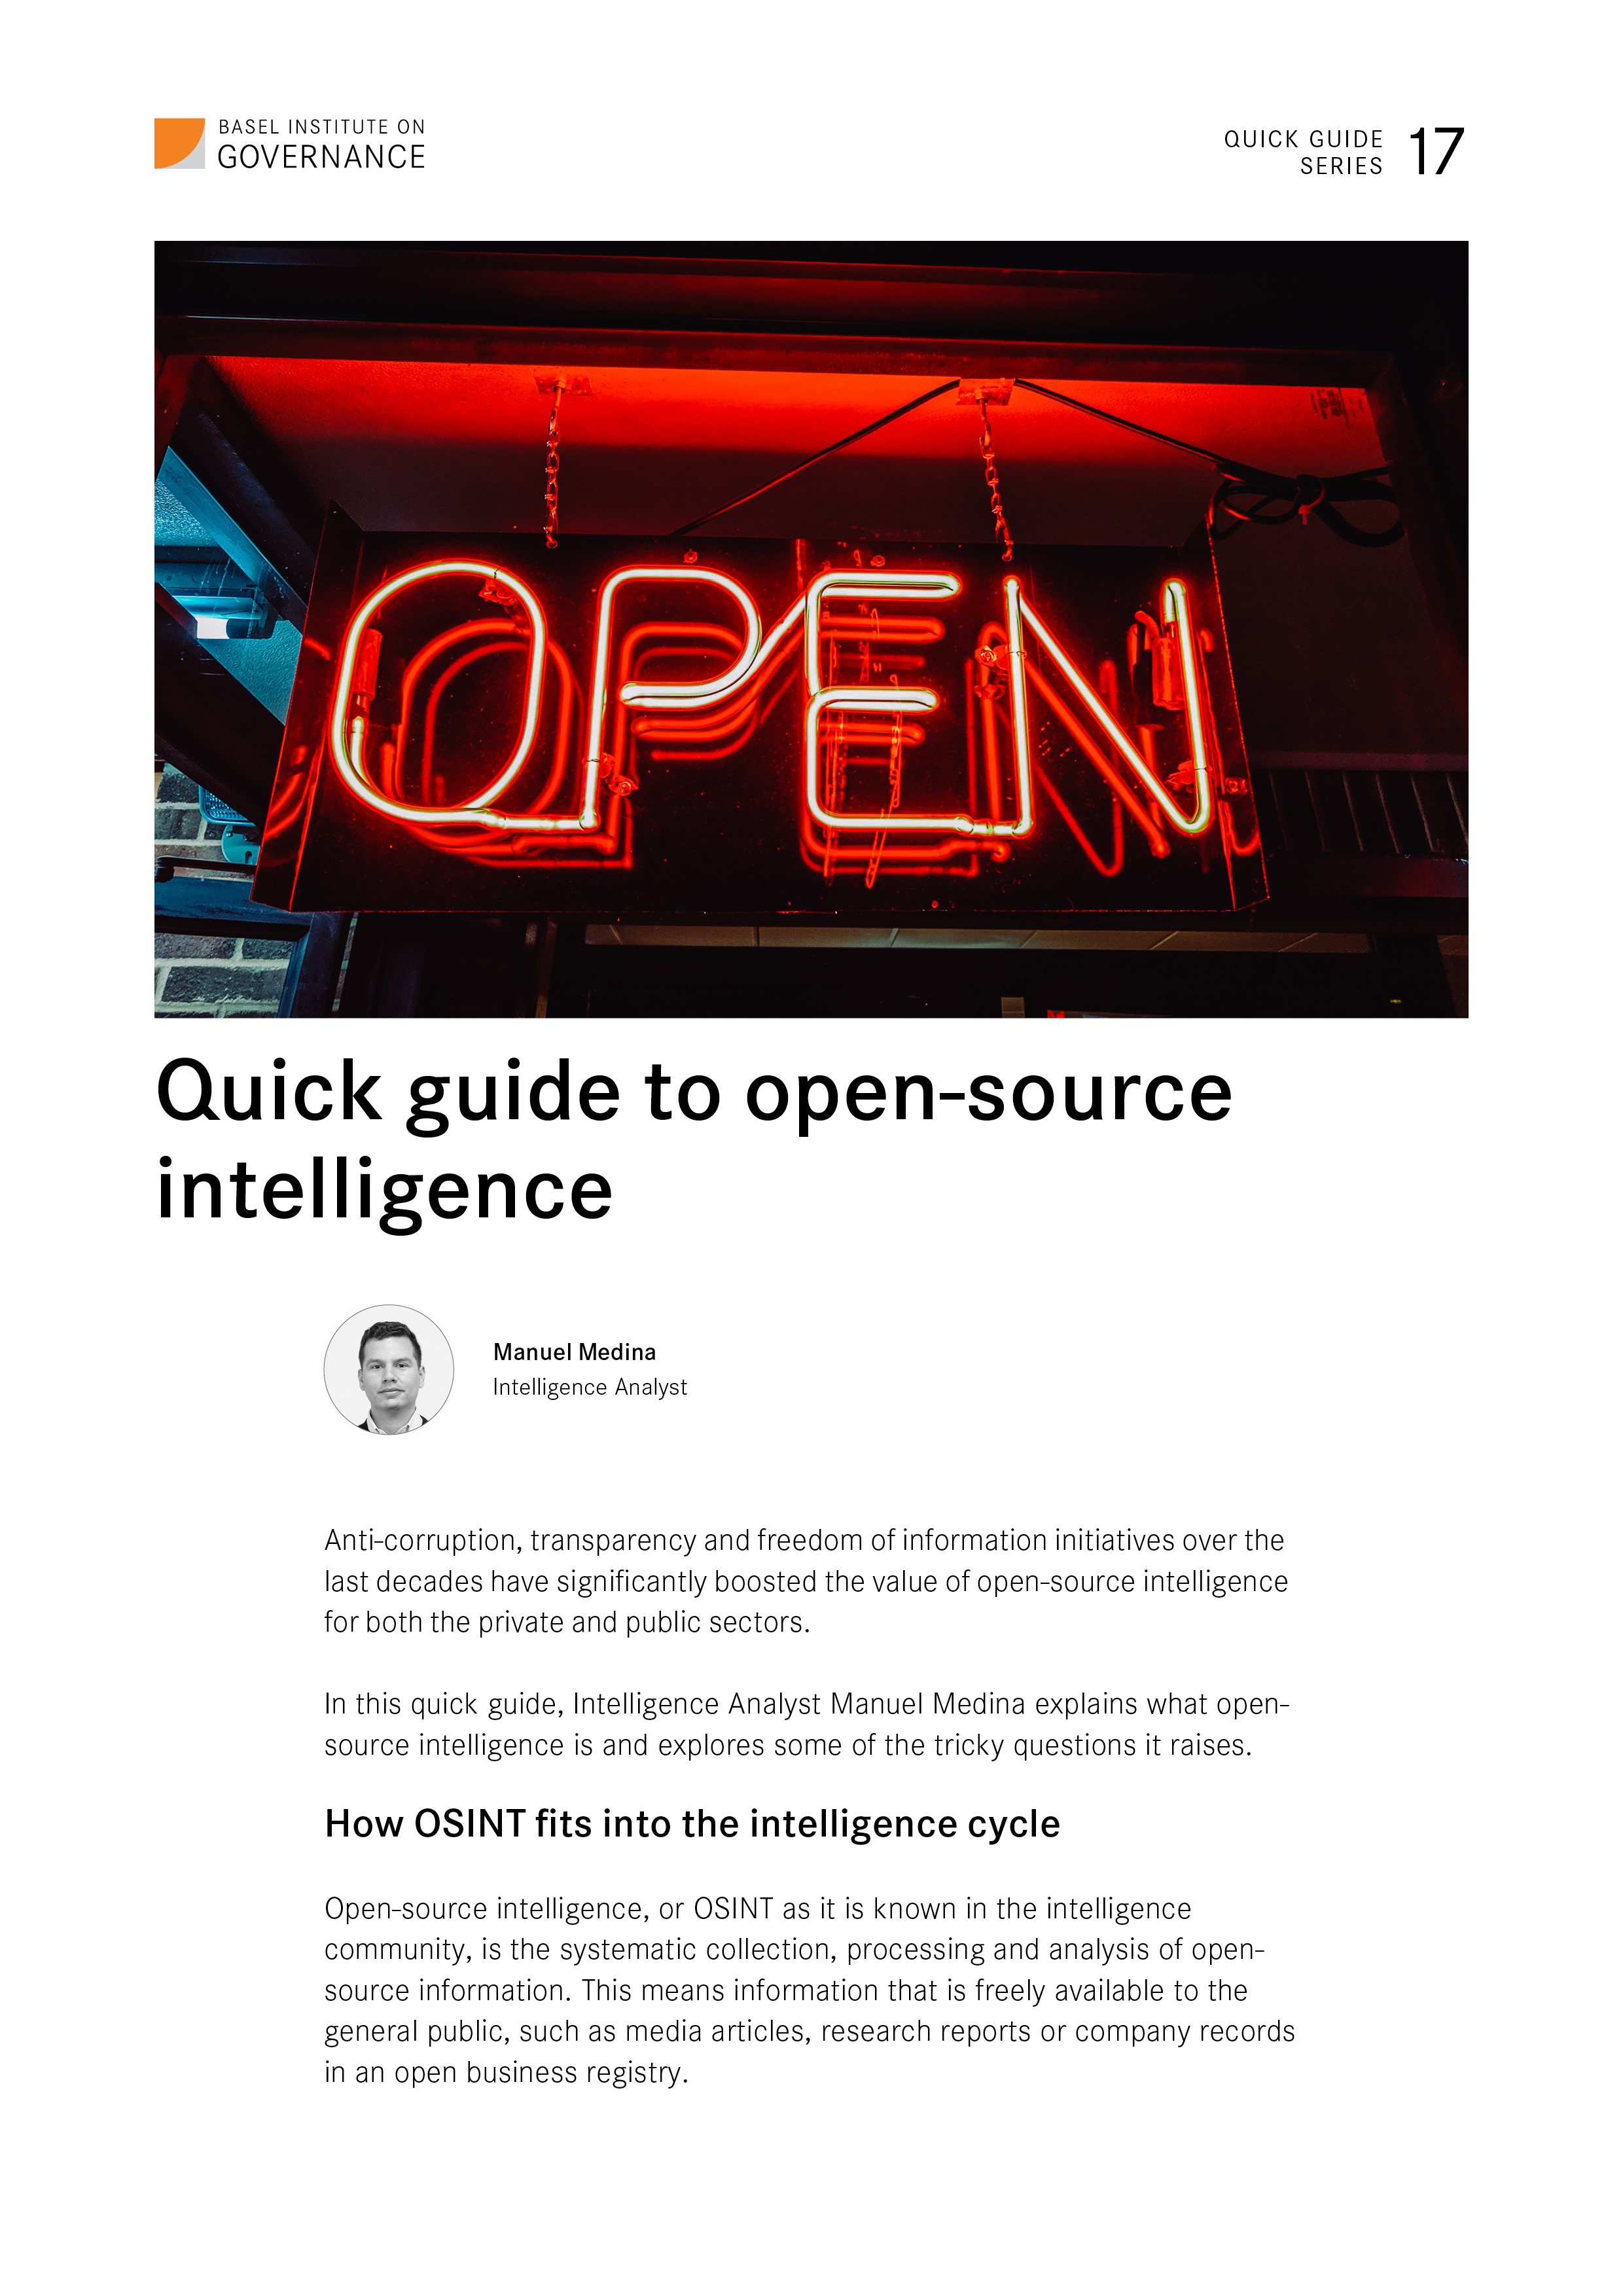 Quick guide 17: Open Intelligence